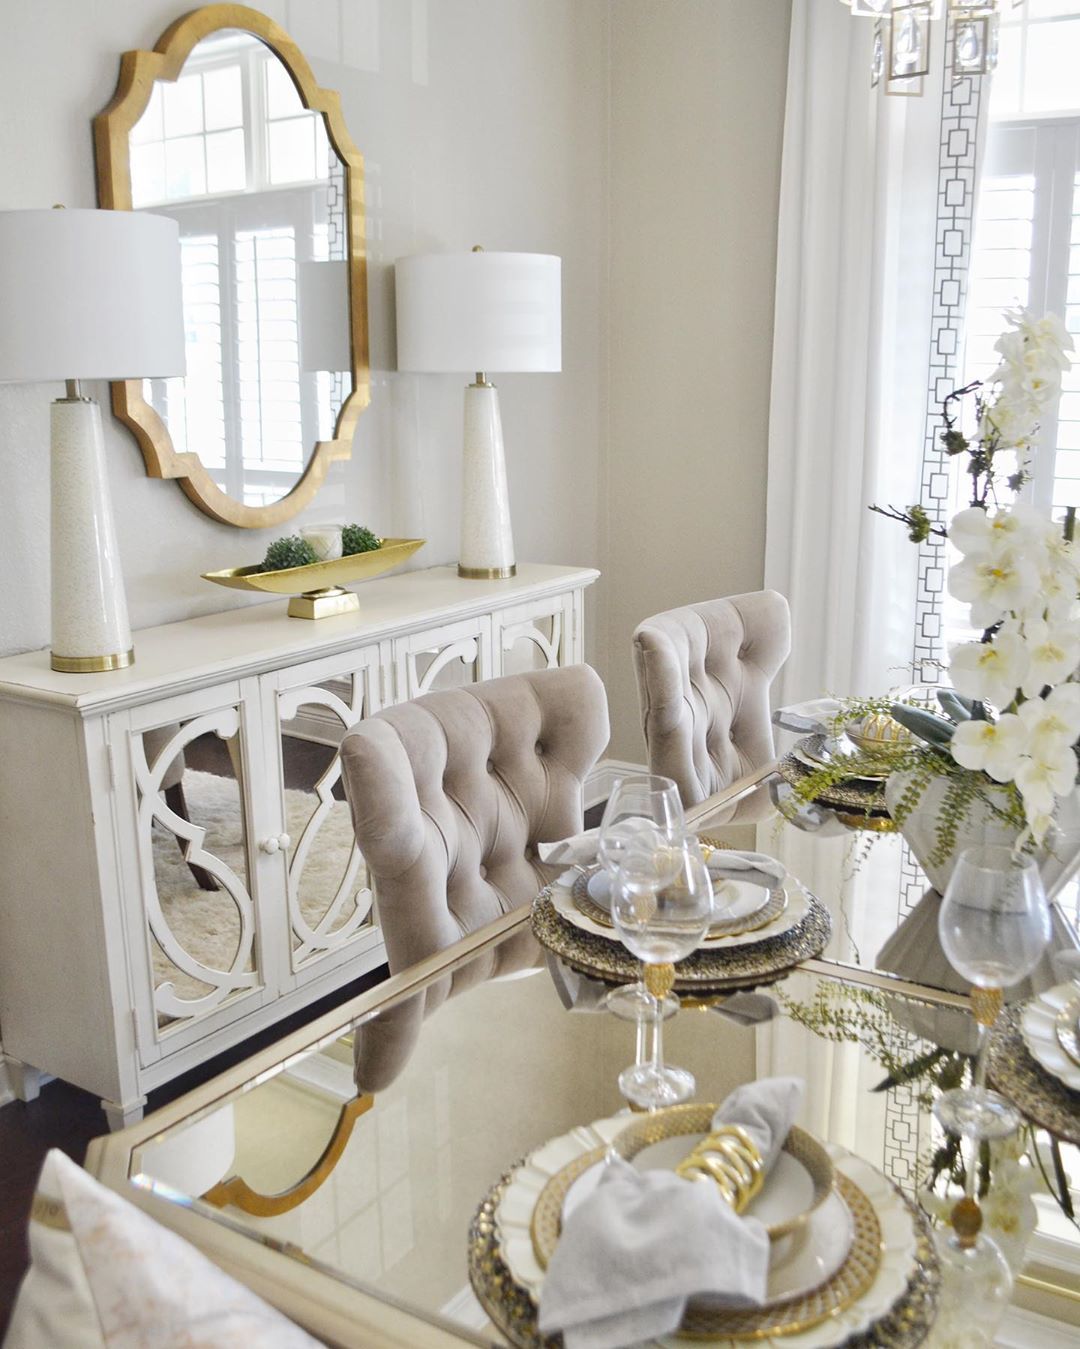 Glam Chandelier Dining Room - Dining room can be your little oasis